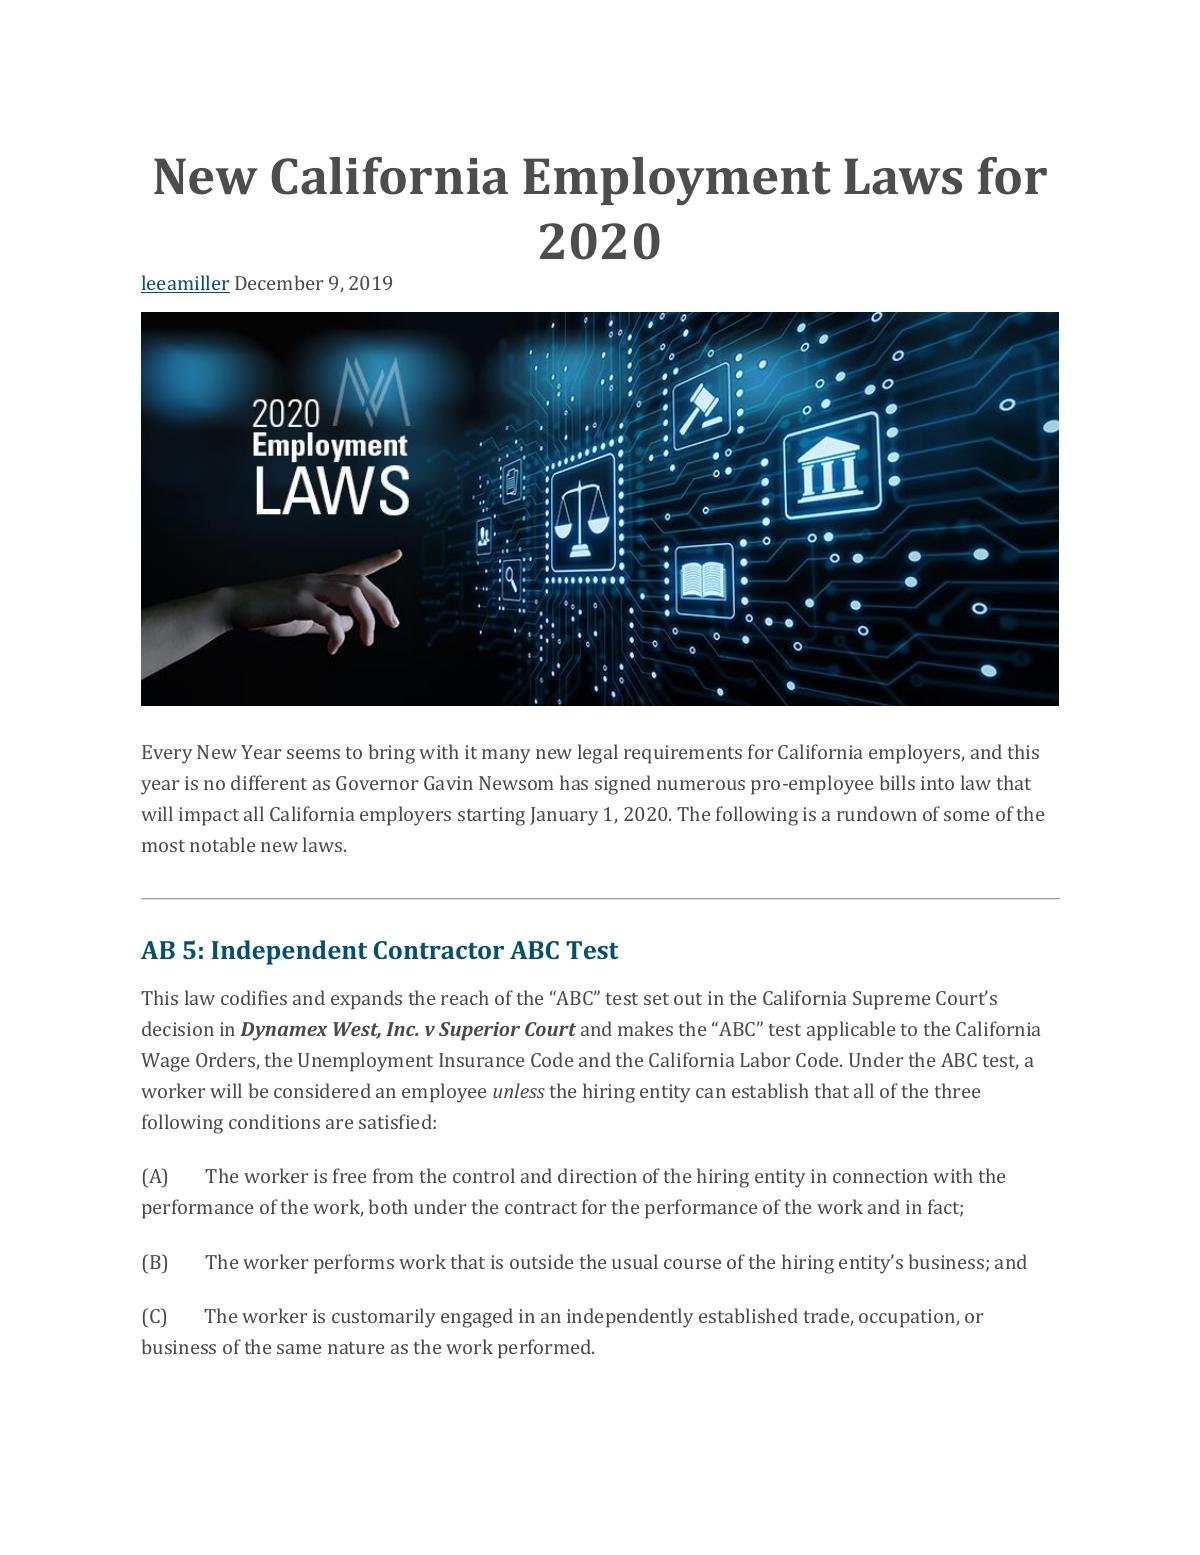 New California Employment Laws for 2020